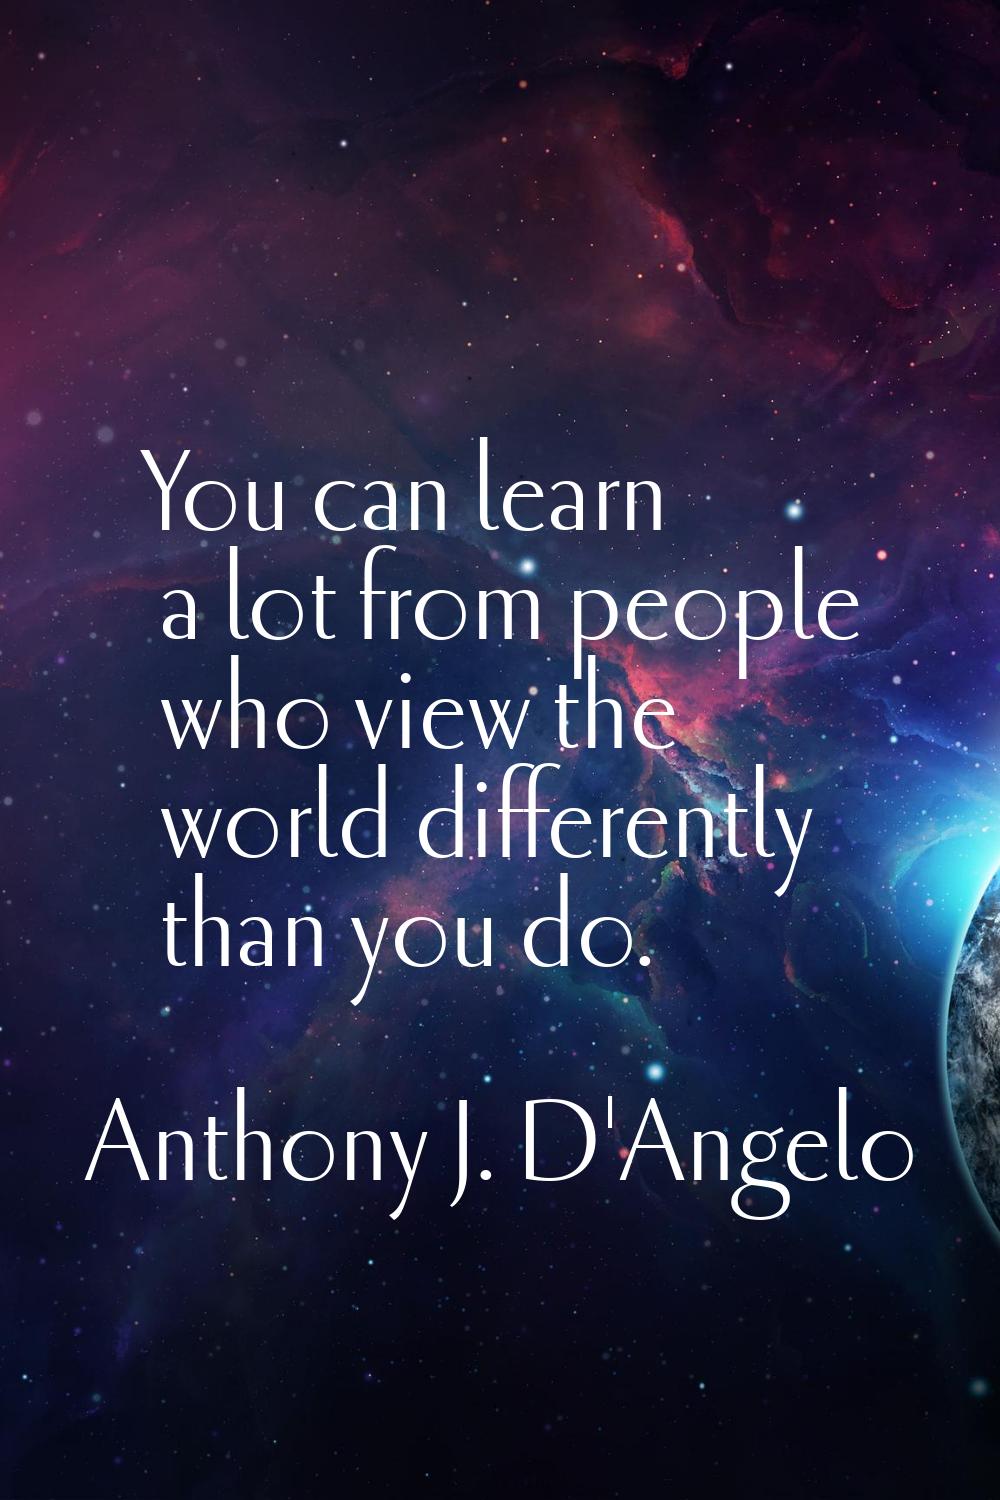 You can learn a lot from people who view the world differently than you do.